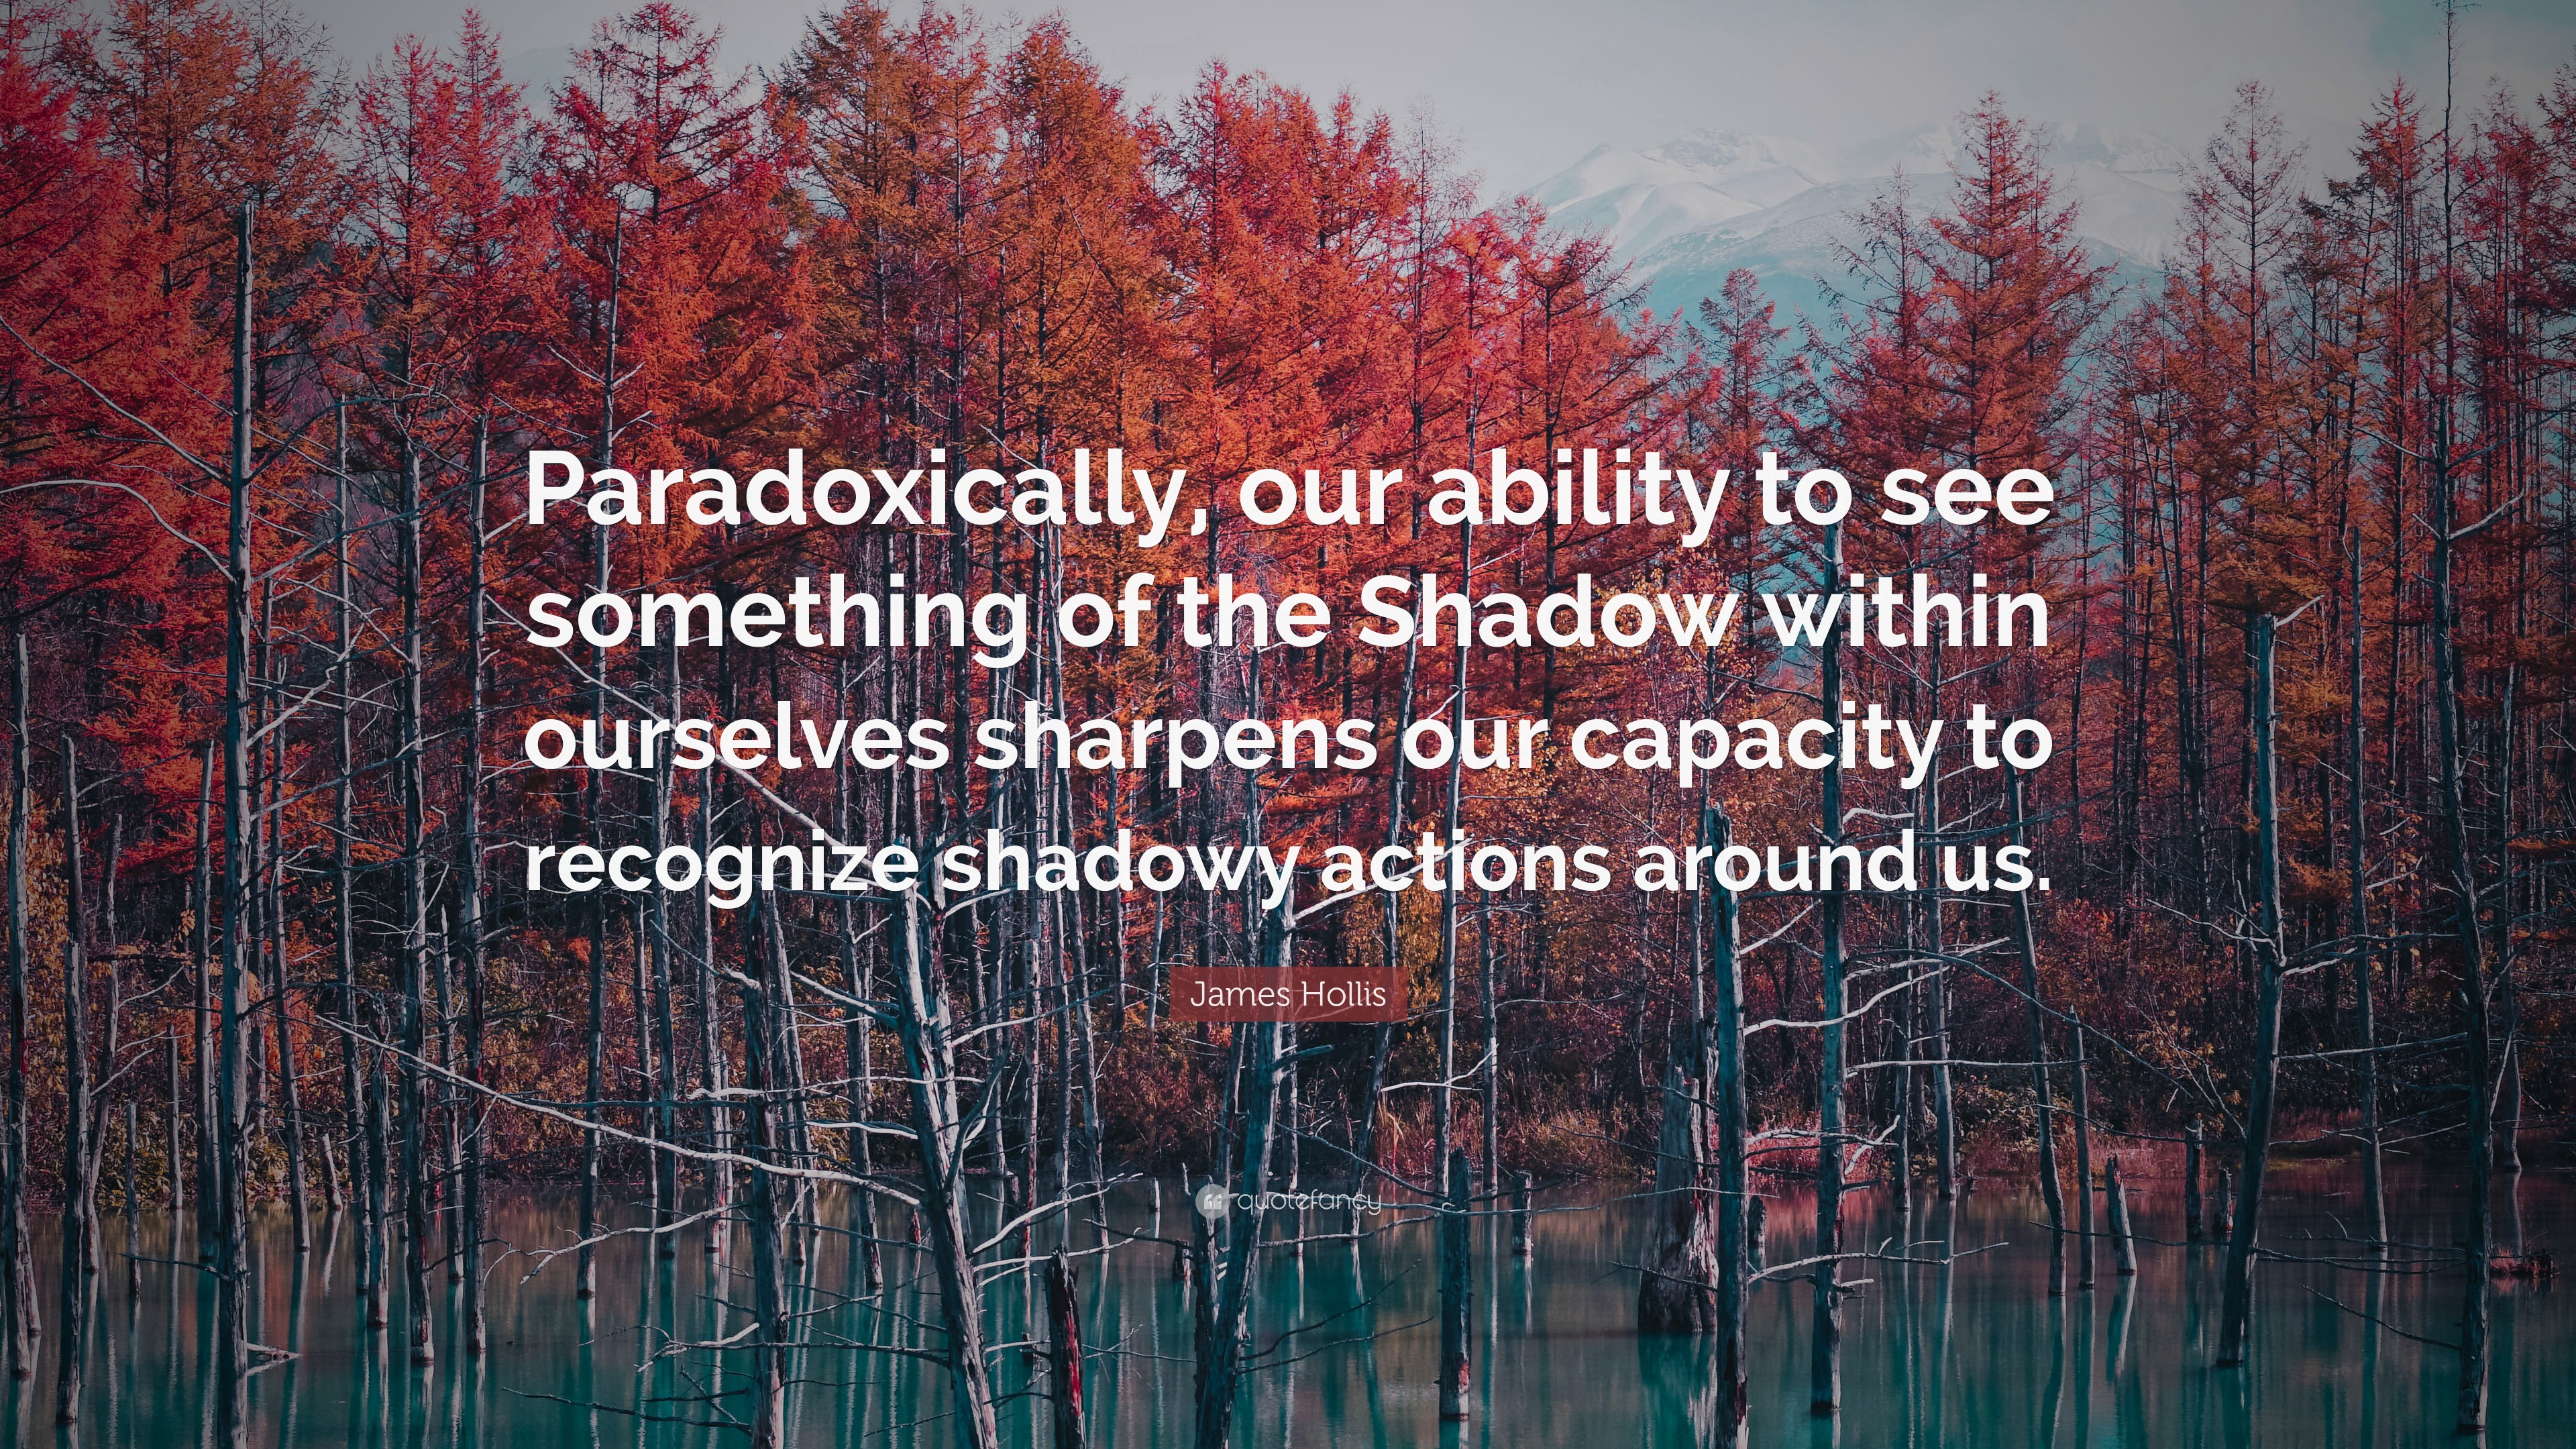 James Hollis Quote: “Paradoxically, our ability to see something of the  Shadow within ourselves sharpens our capacity to recognize shadowy ac”